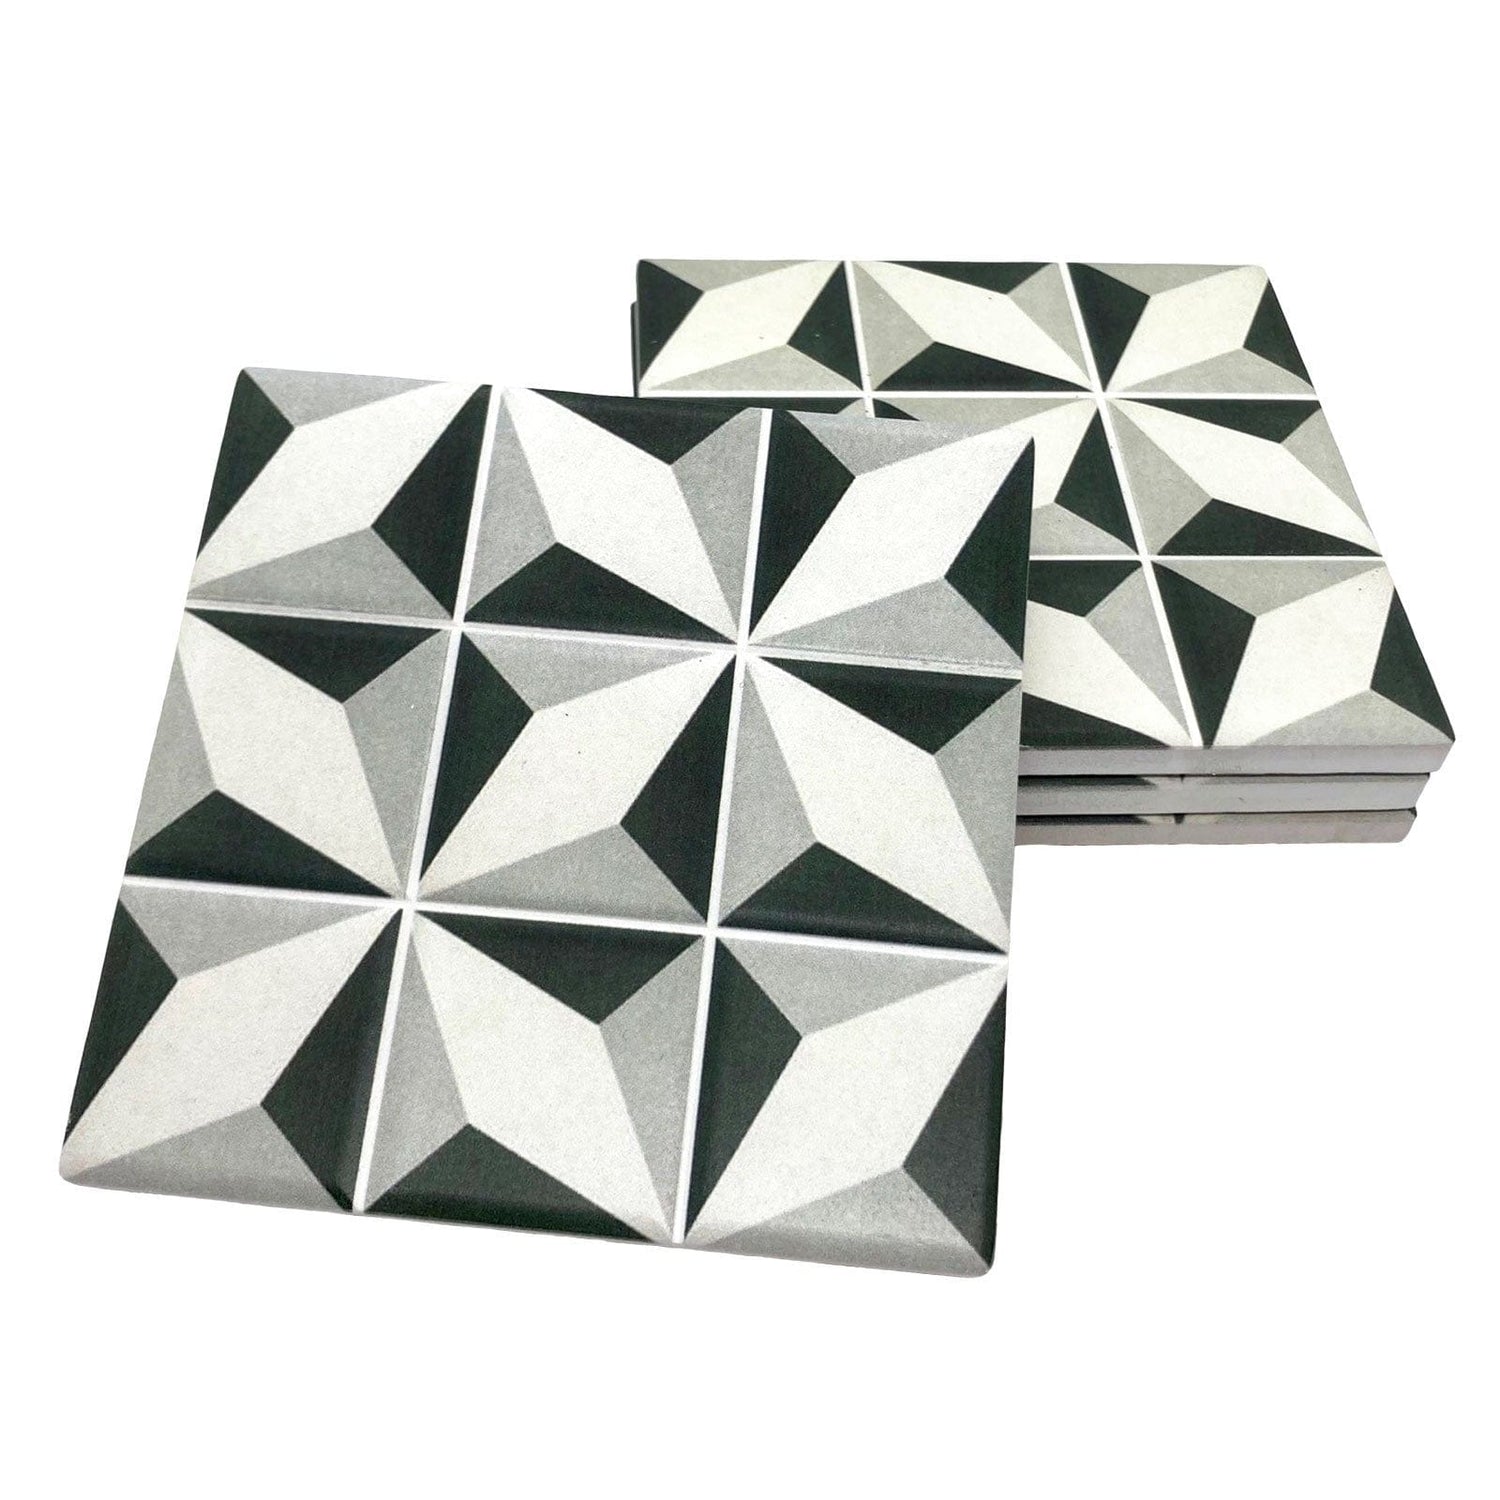 Grey and White Moroccan Tile Coasters - Set of 4